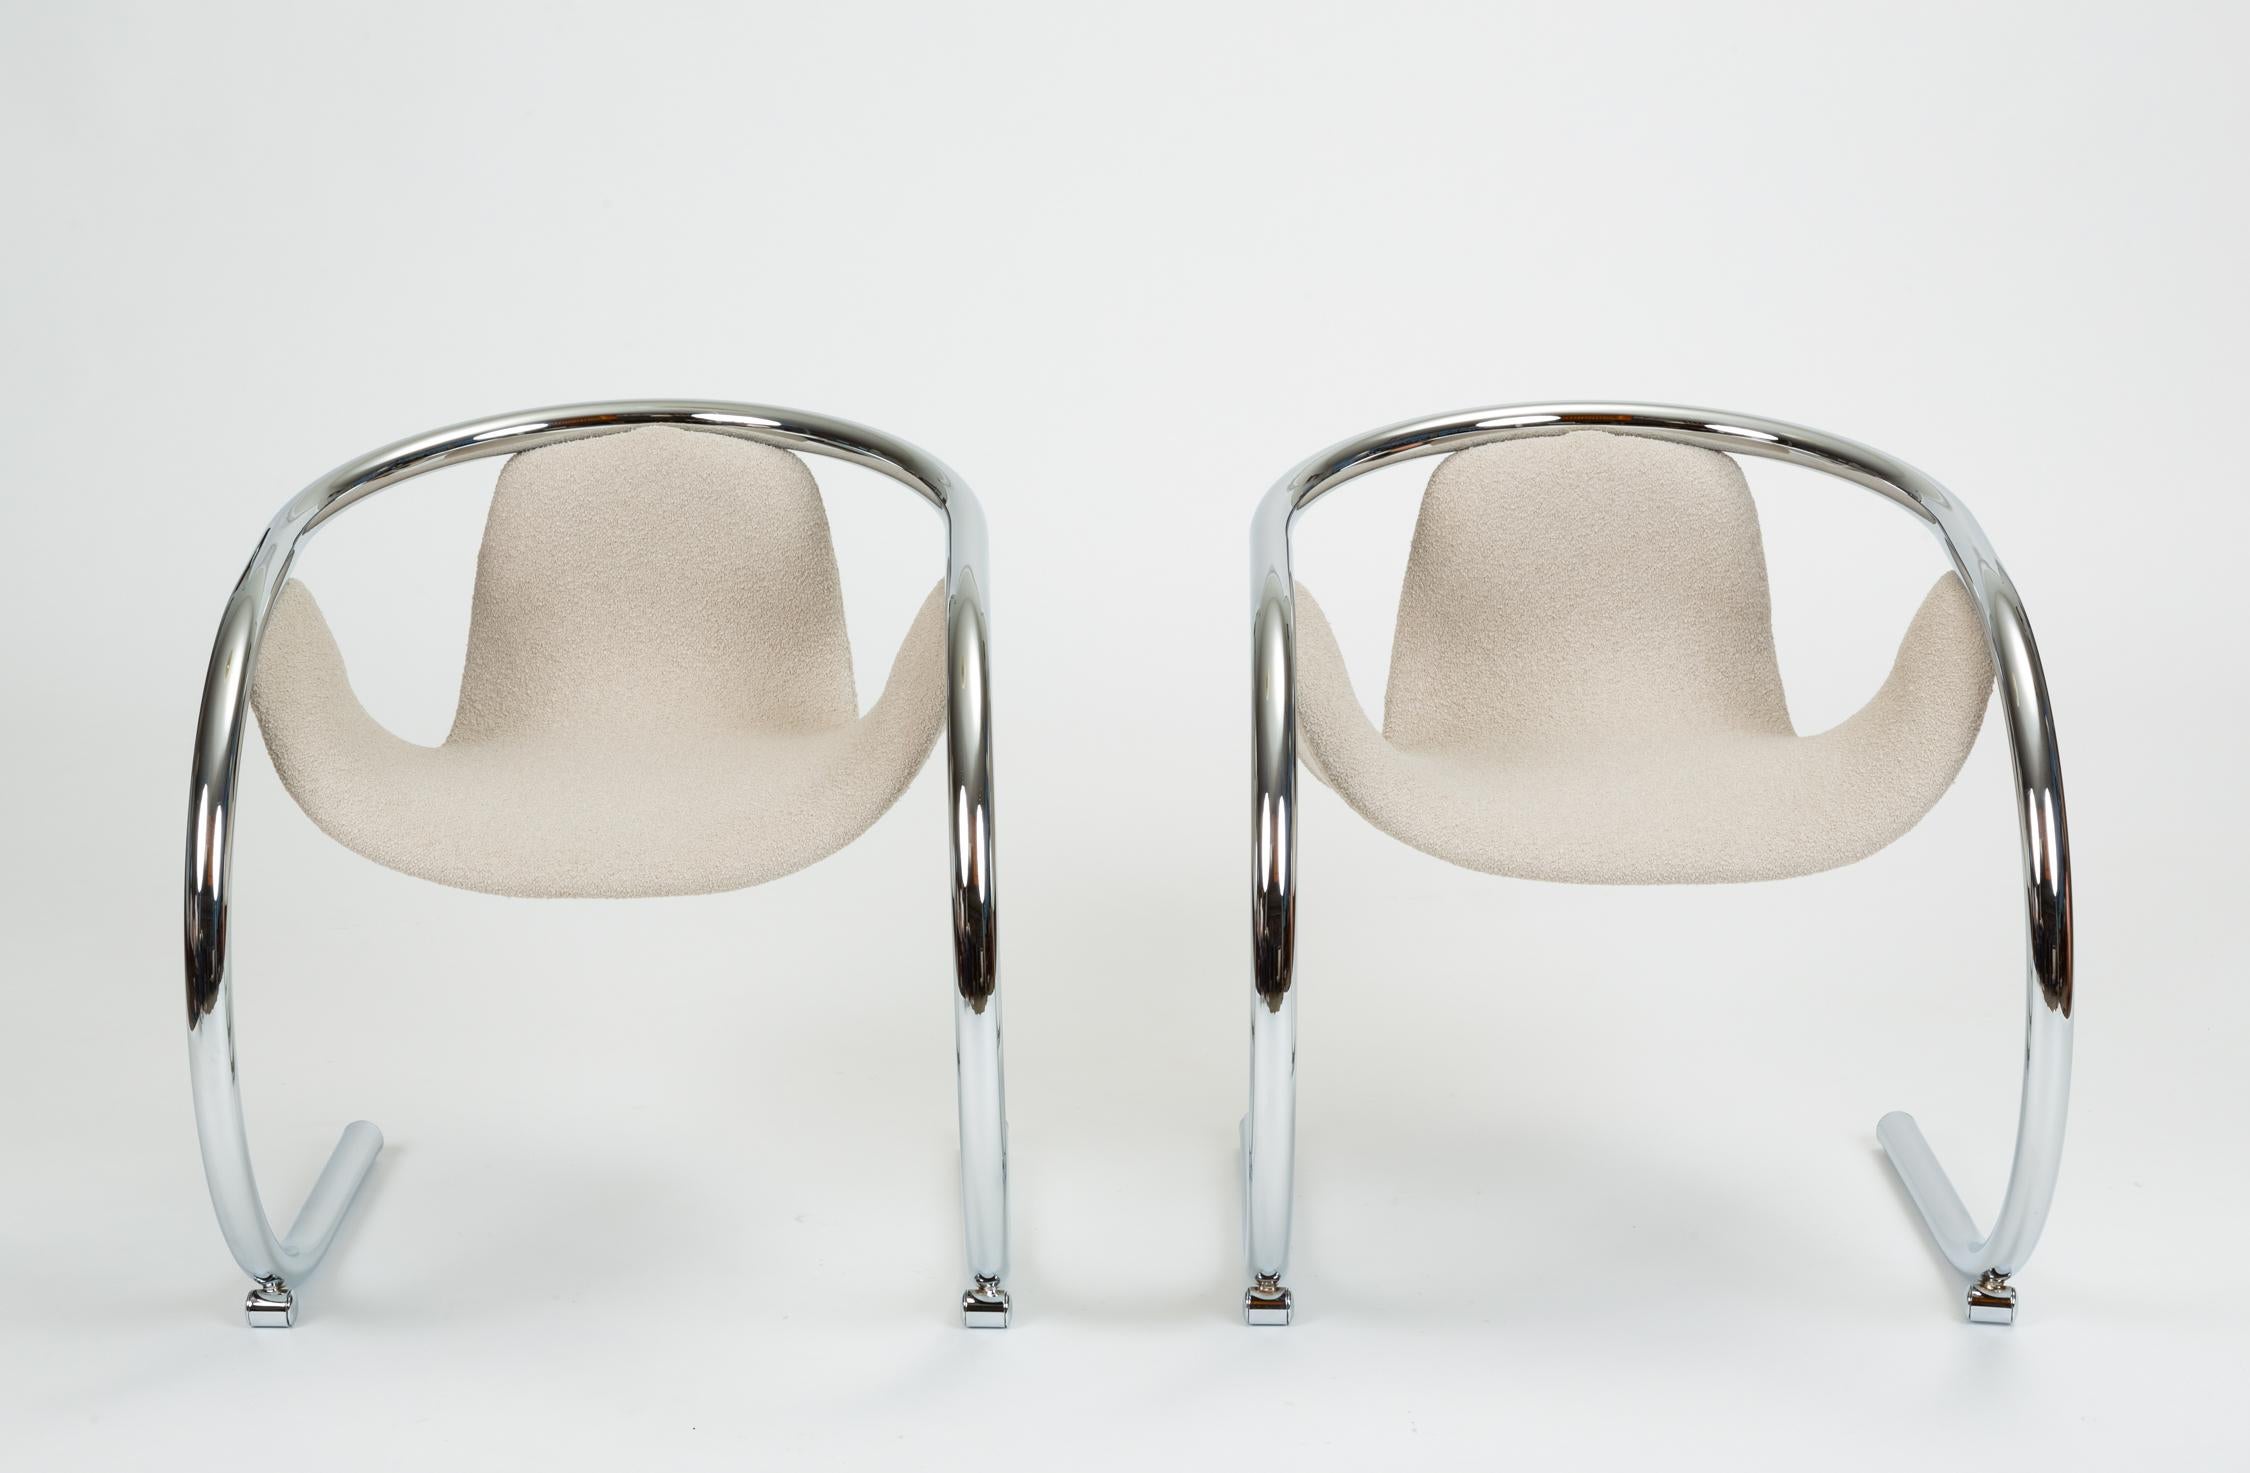 A pair of cantilevered chrome chairs designed by Byron Botker for California-based Landes Manufacturing Co. The sleek design is based around a single, curved frame of wide tubular steel, arched up from the floor to form the chair arms and back.